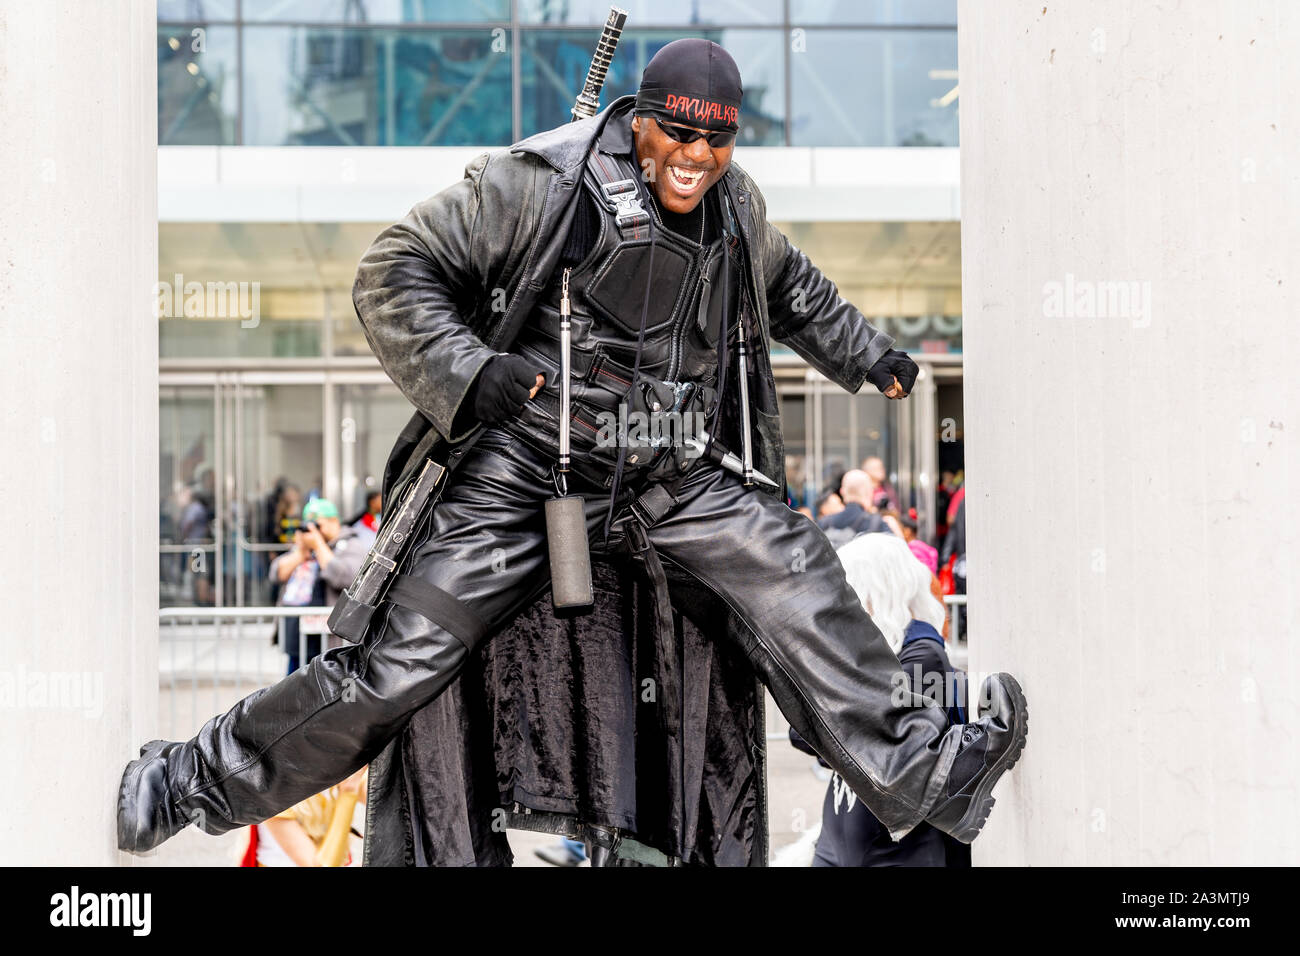 New York, New York - October 6, 2019: Cosplayer dressed as Marvel's Blade during New York Comic Con. Stock Photo